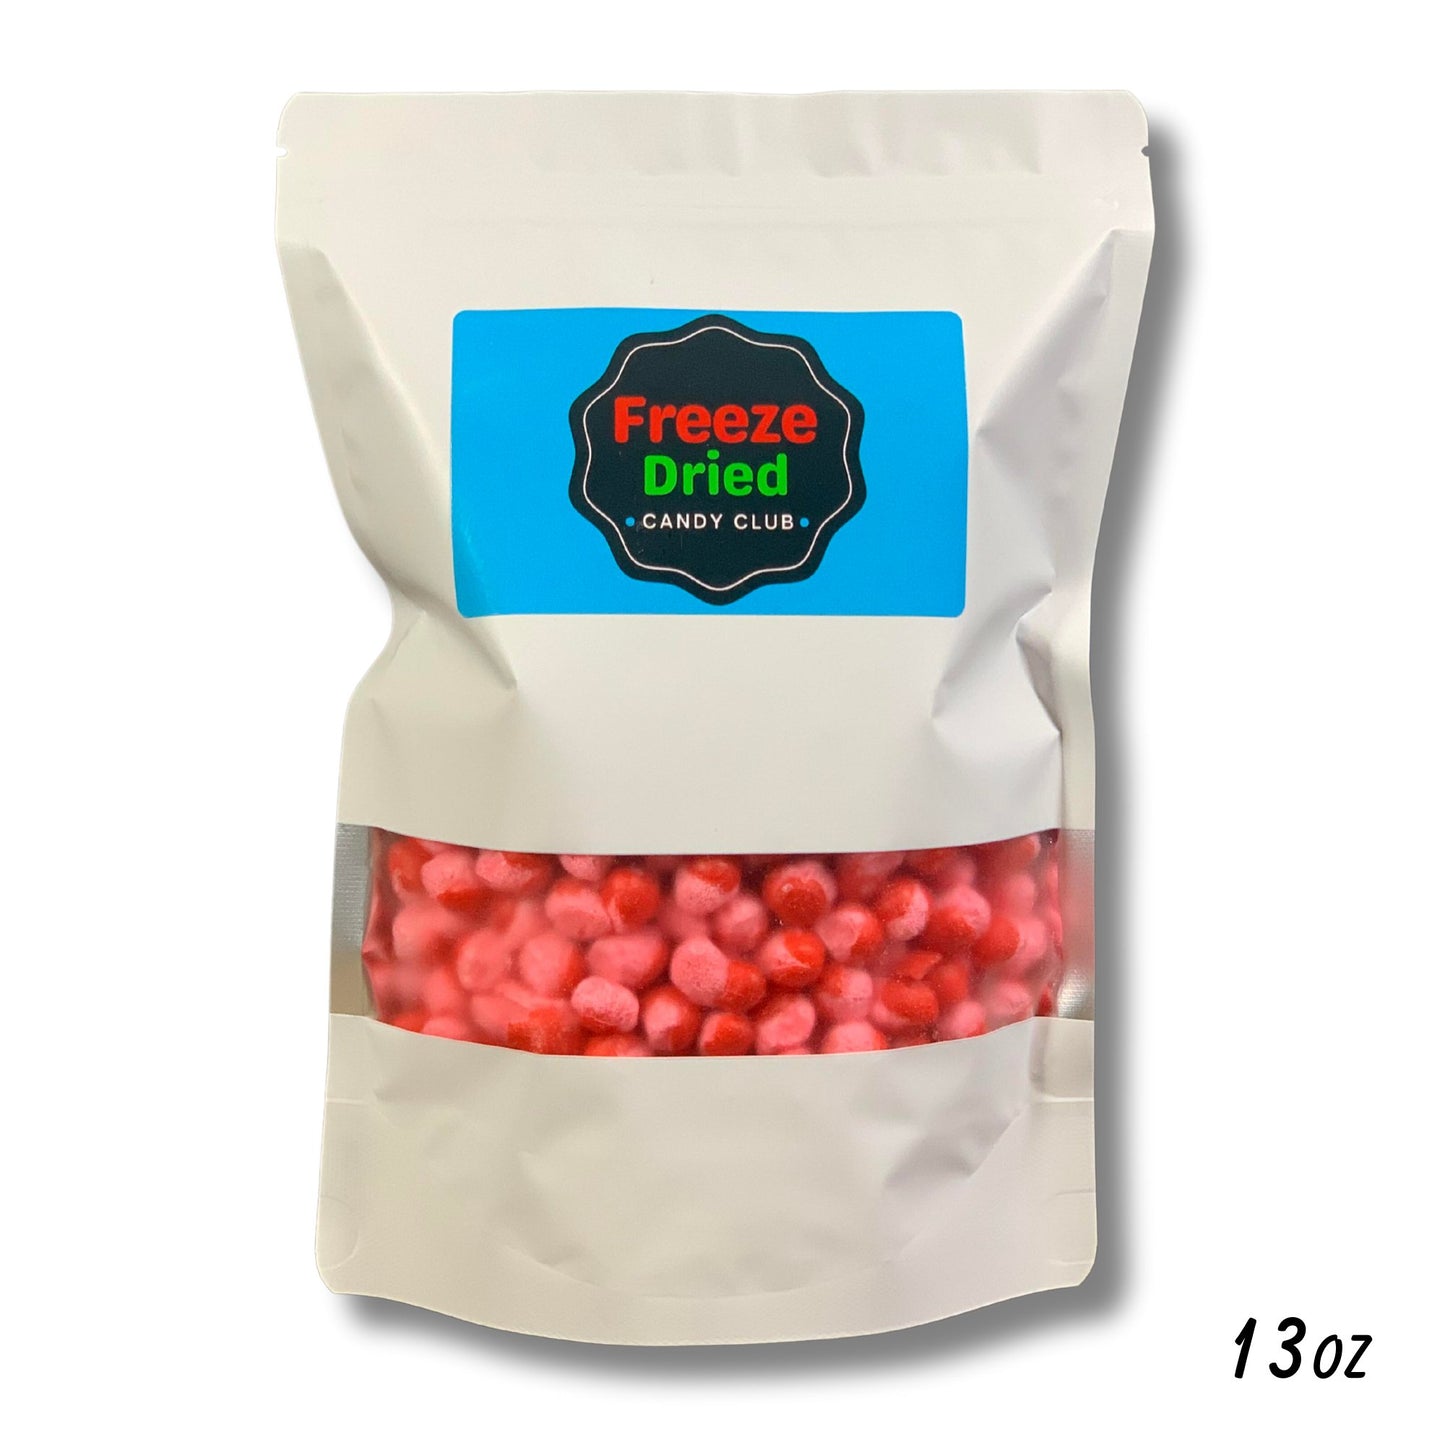 Freeze Dried Candy Club Red Hots - Crunchy, Sweet, Spicy & Delicious! - Freeze Dried Candy Club